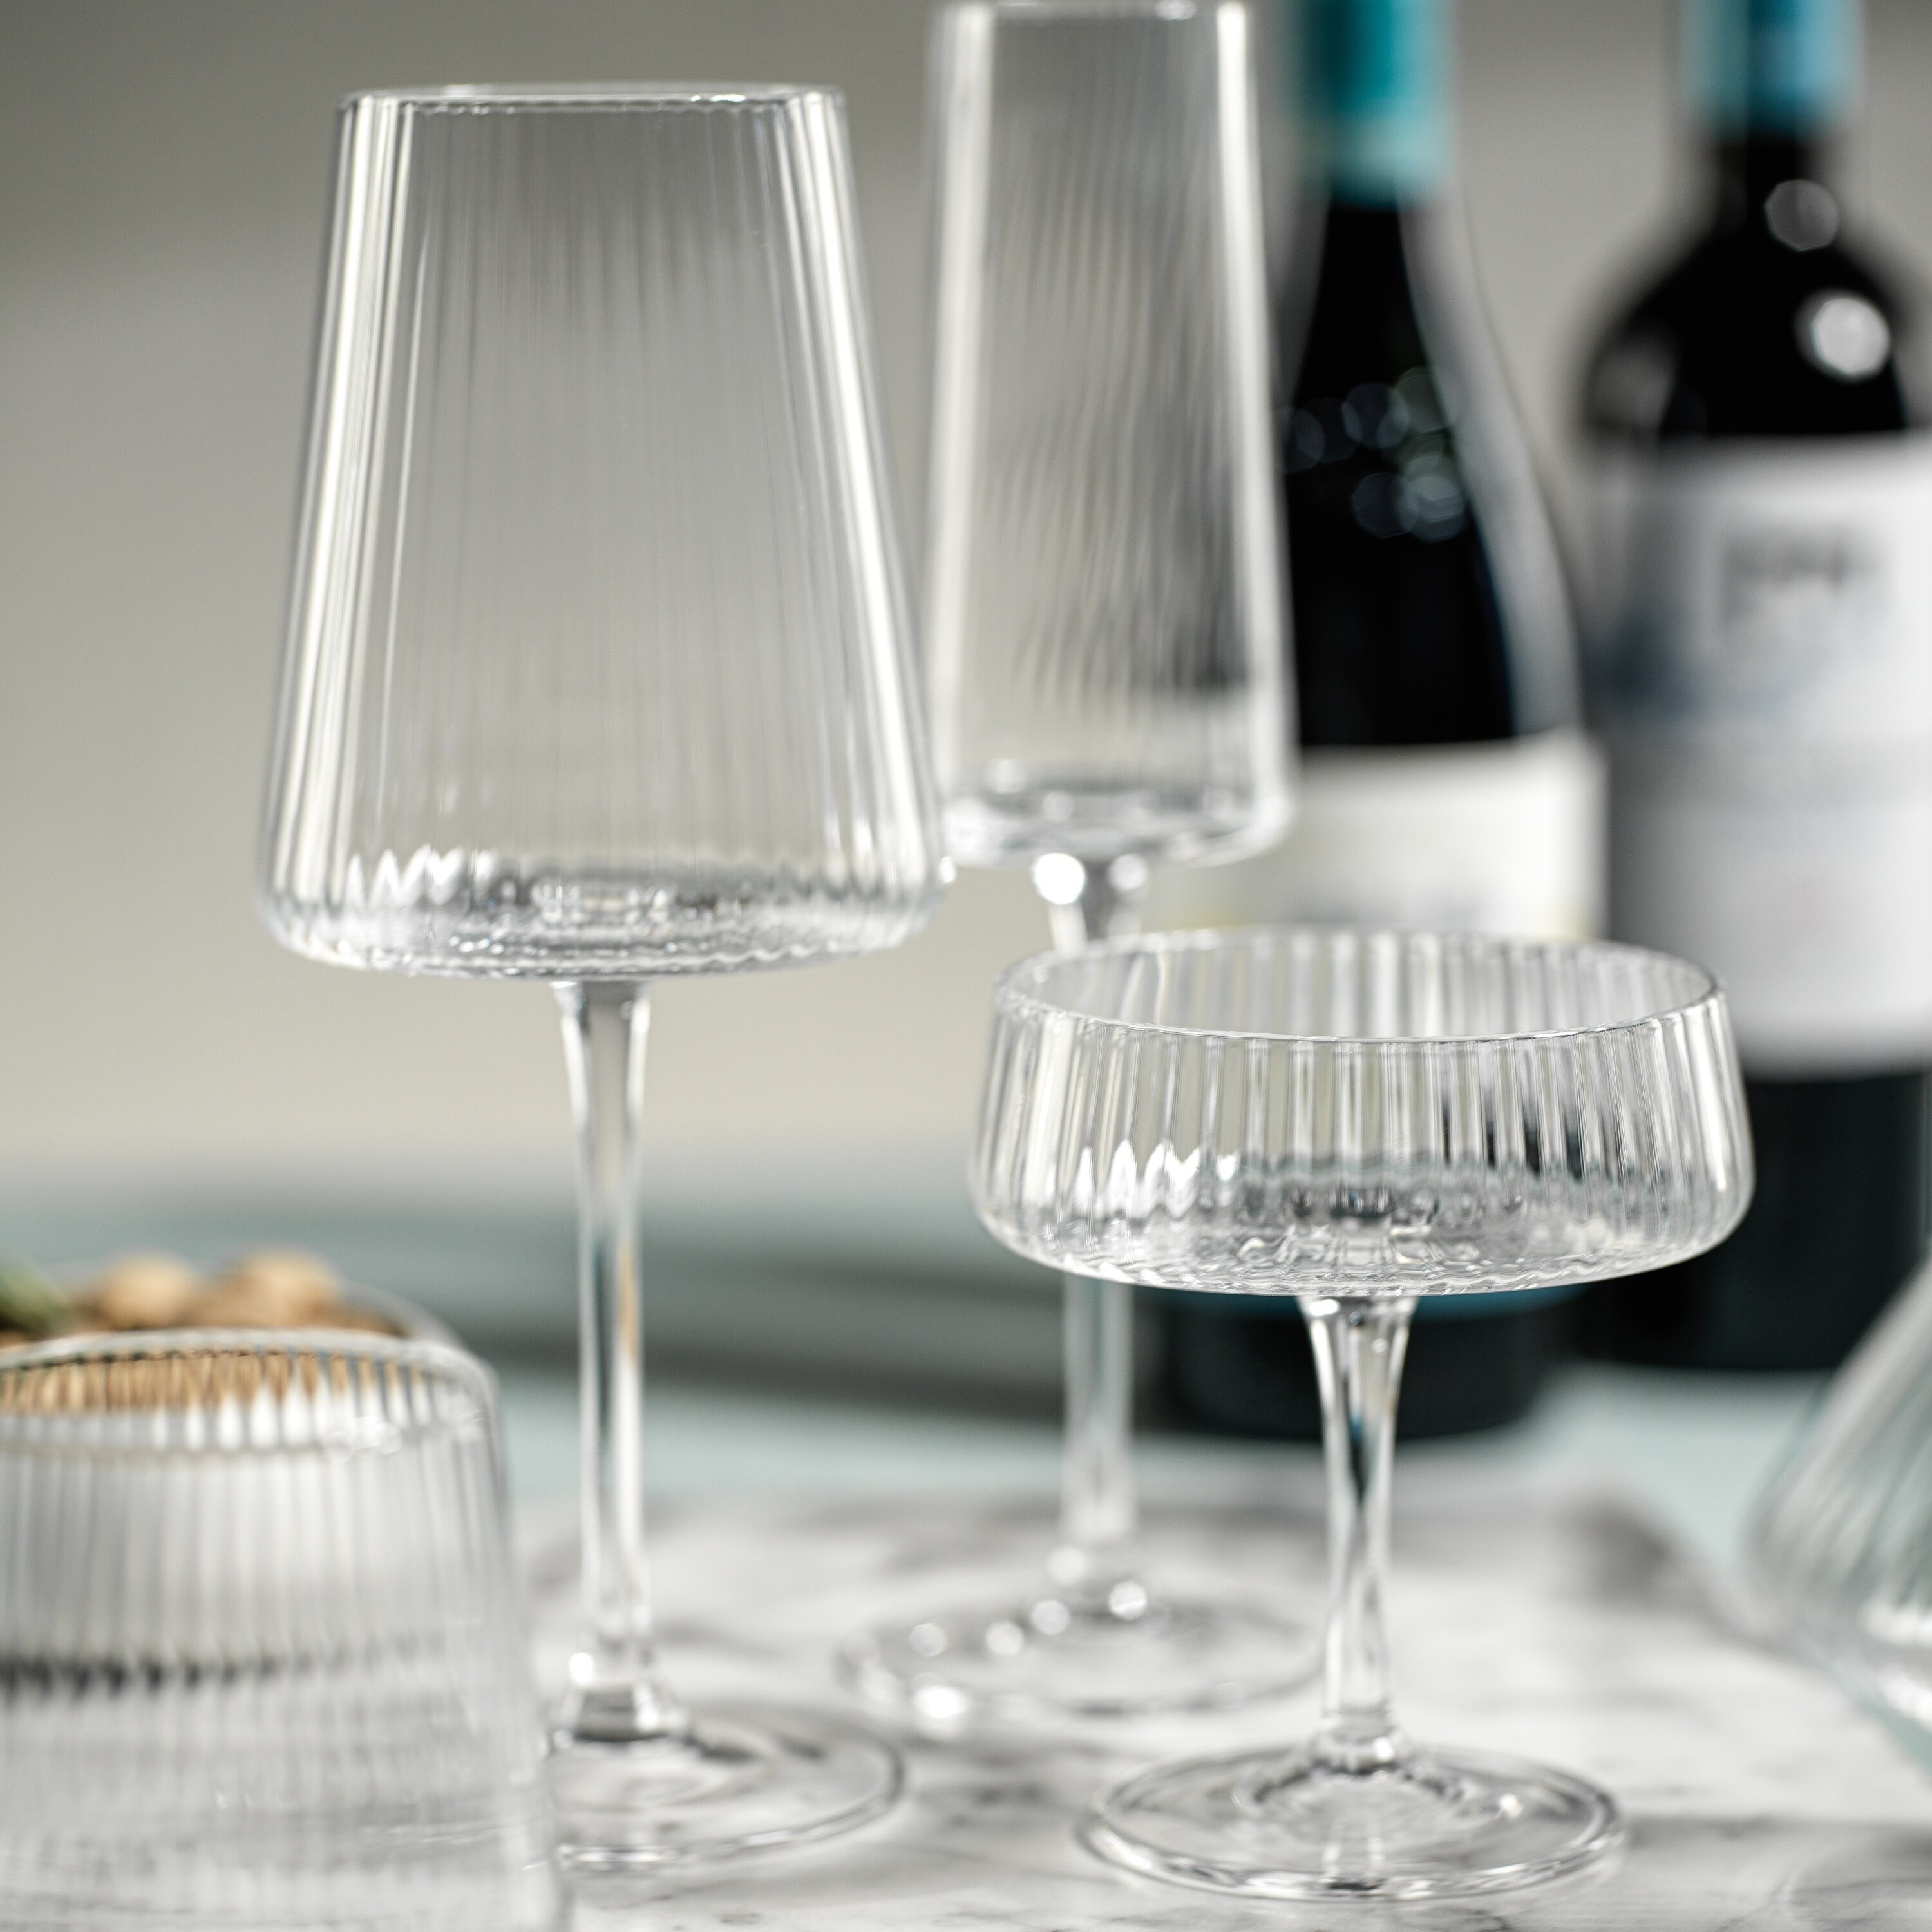 https://ak1.ostkcdn.com/images/products/is/images/direct/0bc2732e87d0a5f2ba8212673d3313dd28f86a49/Benin-Fluted-Textured-Wine-Glasses%2C-Set-of-4.jpg